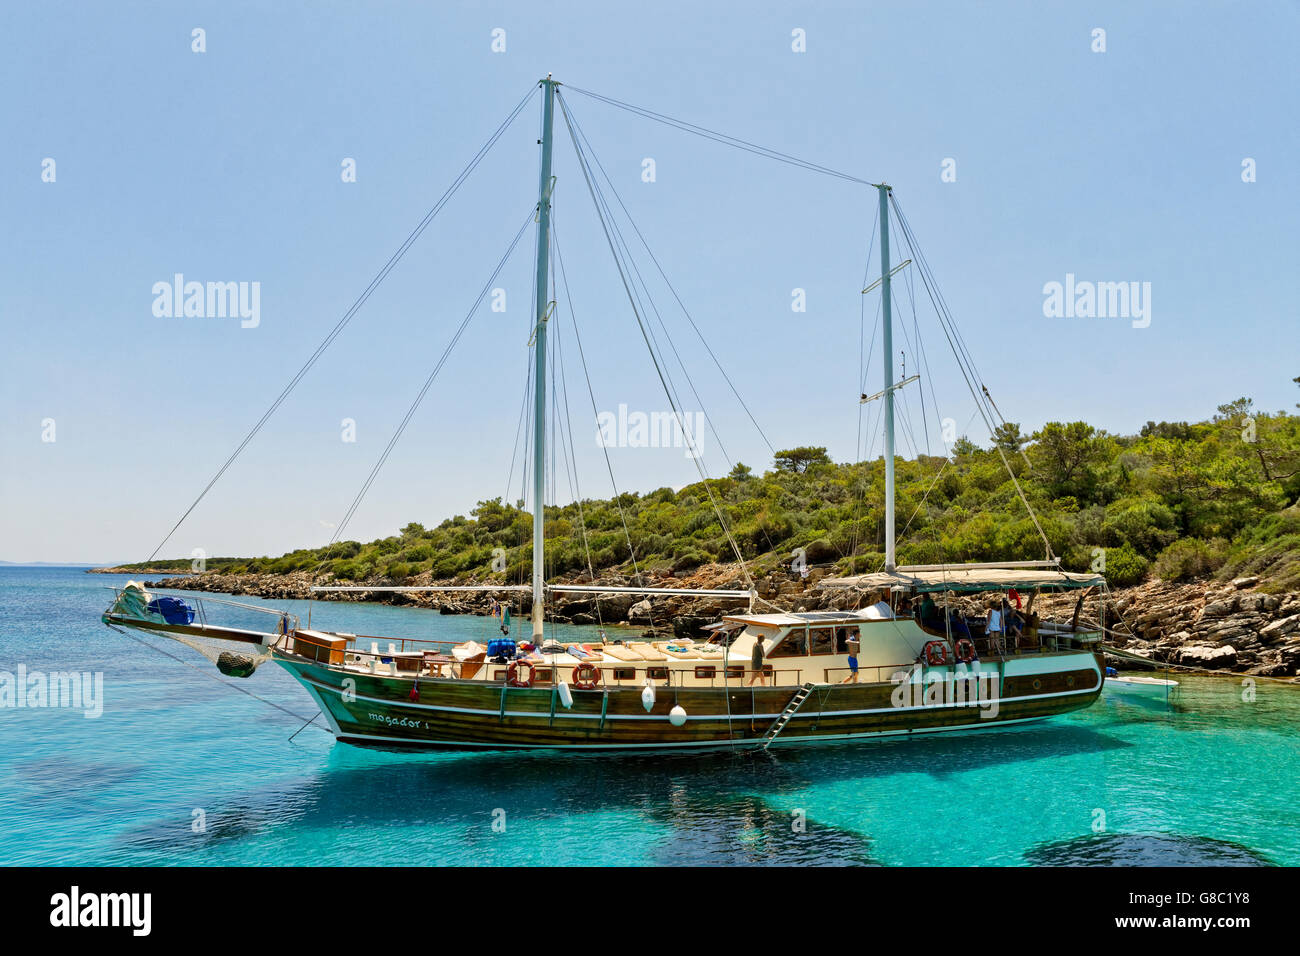 Gulet cruise or day trip excursion boat at anchor in Turkey Stock Photo